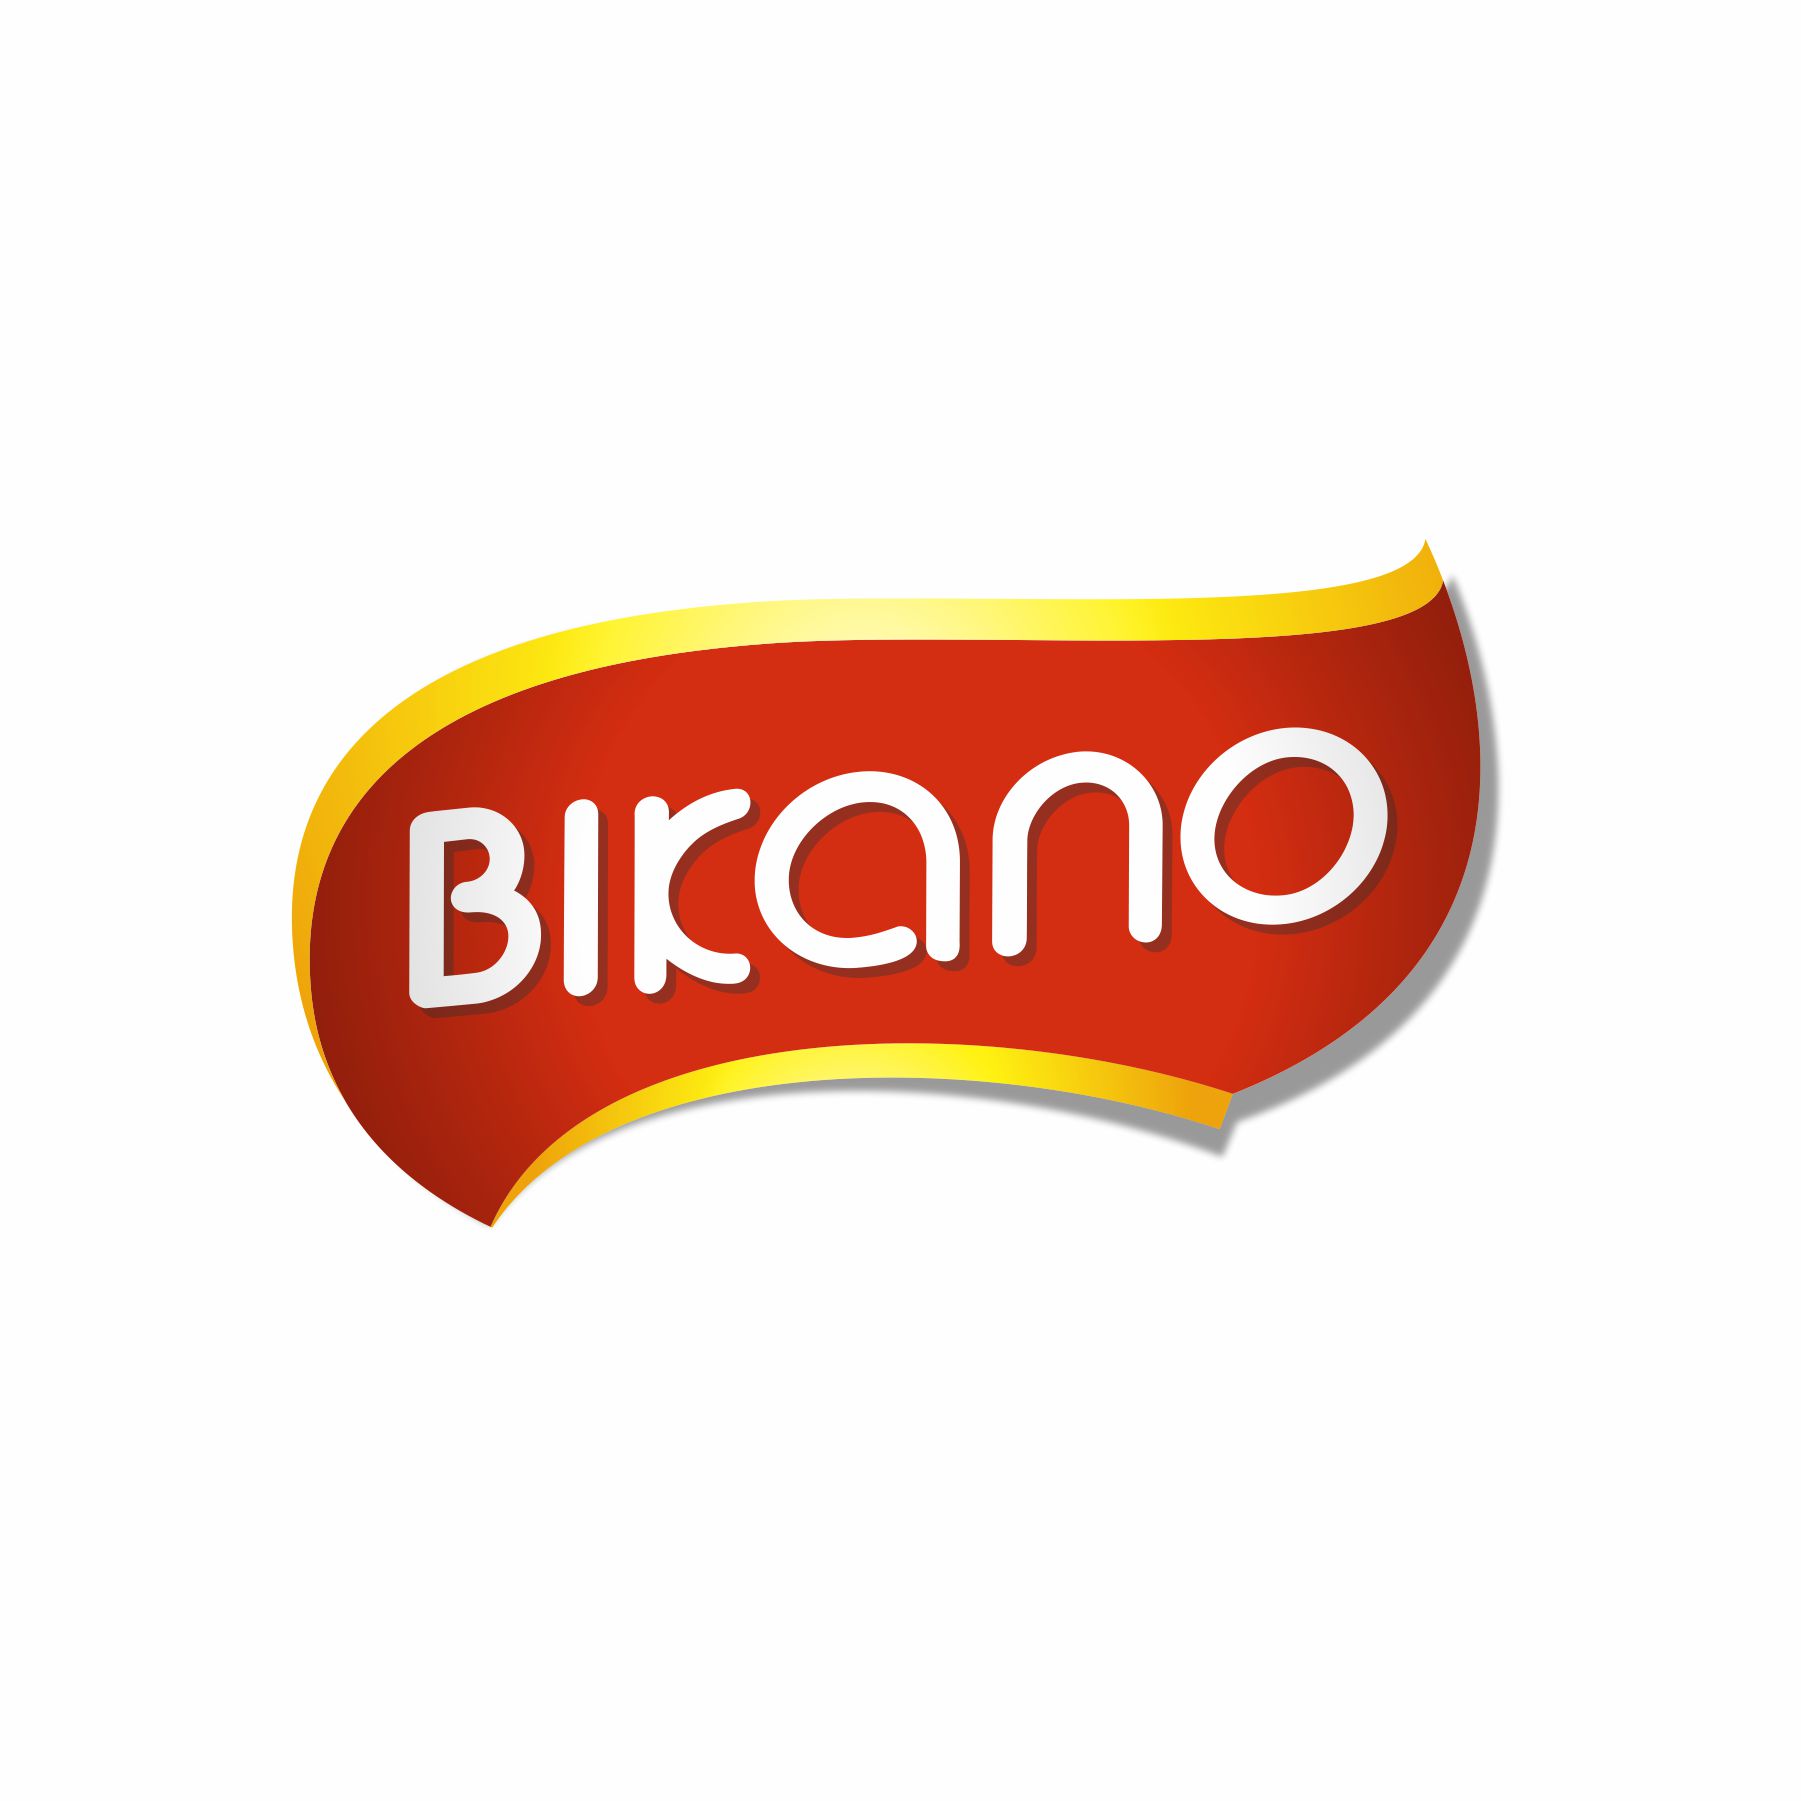 Bikano launches new crispy 'Crunchy Munchy' snacks in 100 gms pack -  CONTRACT MANUFACTURING AND PRIVATE LABEL INDUSTRY INSIGHTS